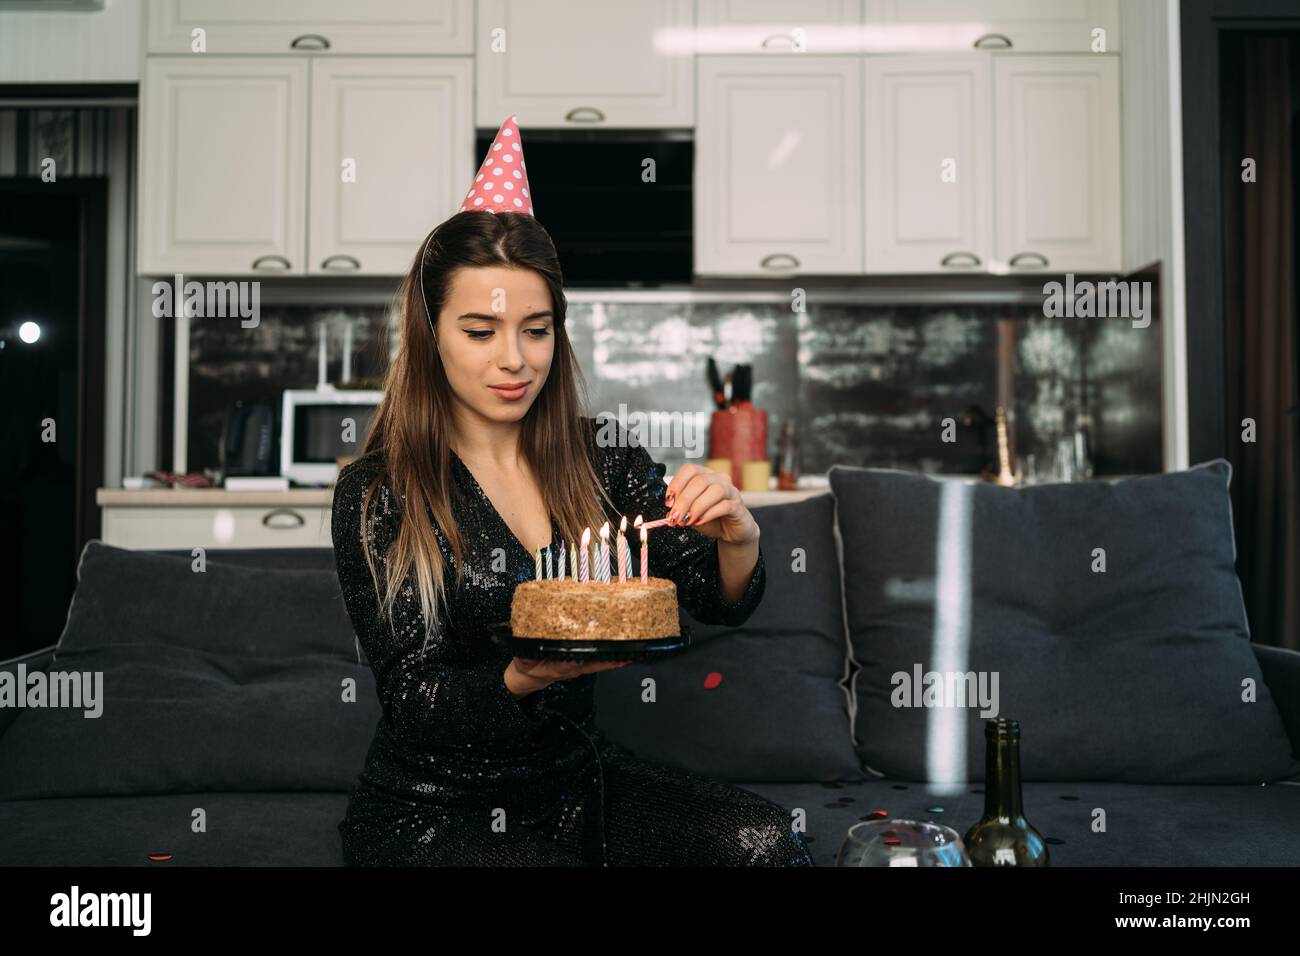 Smiling young woman lighting candles on cake, birthday party at home, sweet dessert with candles, european girl celebrating 25th birthday Stock Photo